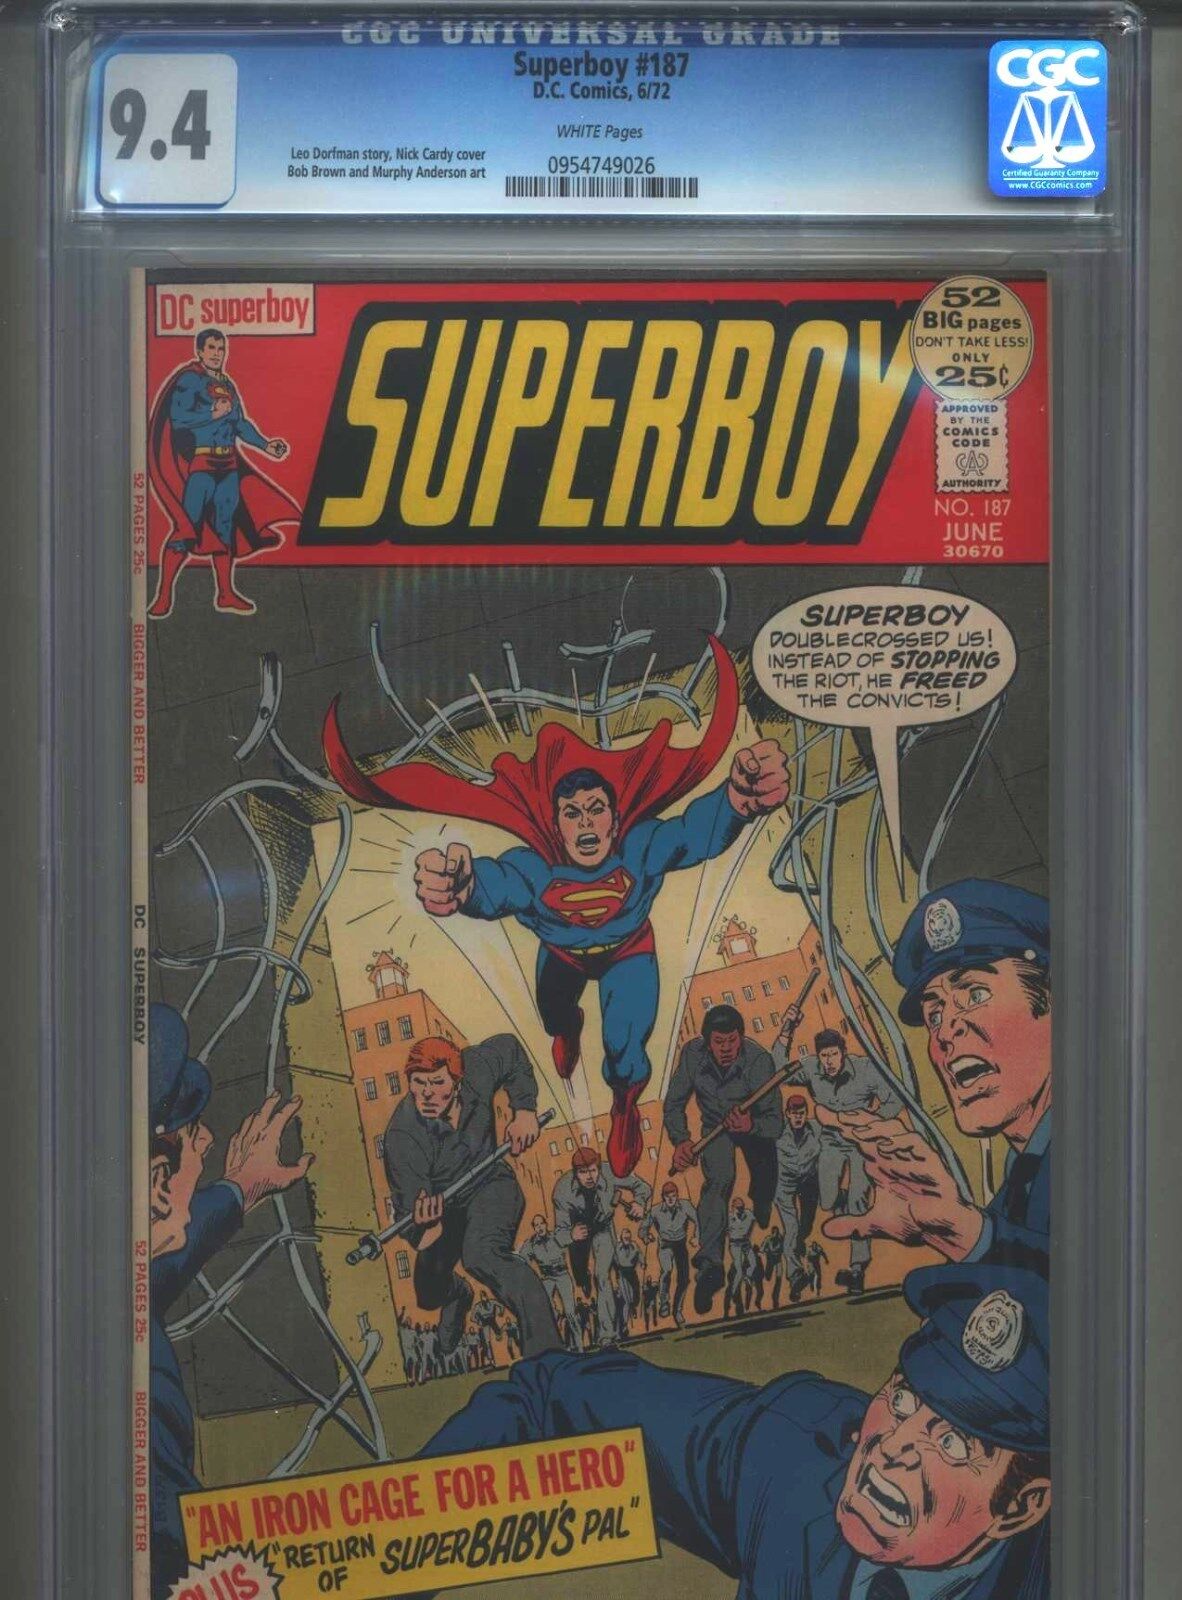 Superboy #187 CGC 9.4 (1972) Nick Cardy Cover White Pages Only 7 Copies Higher